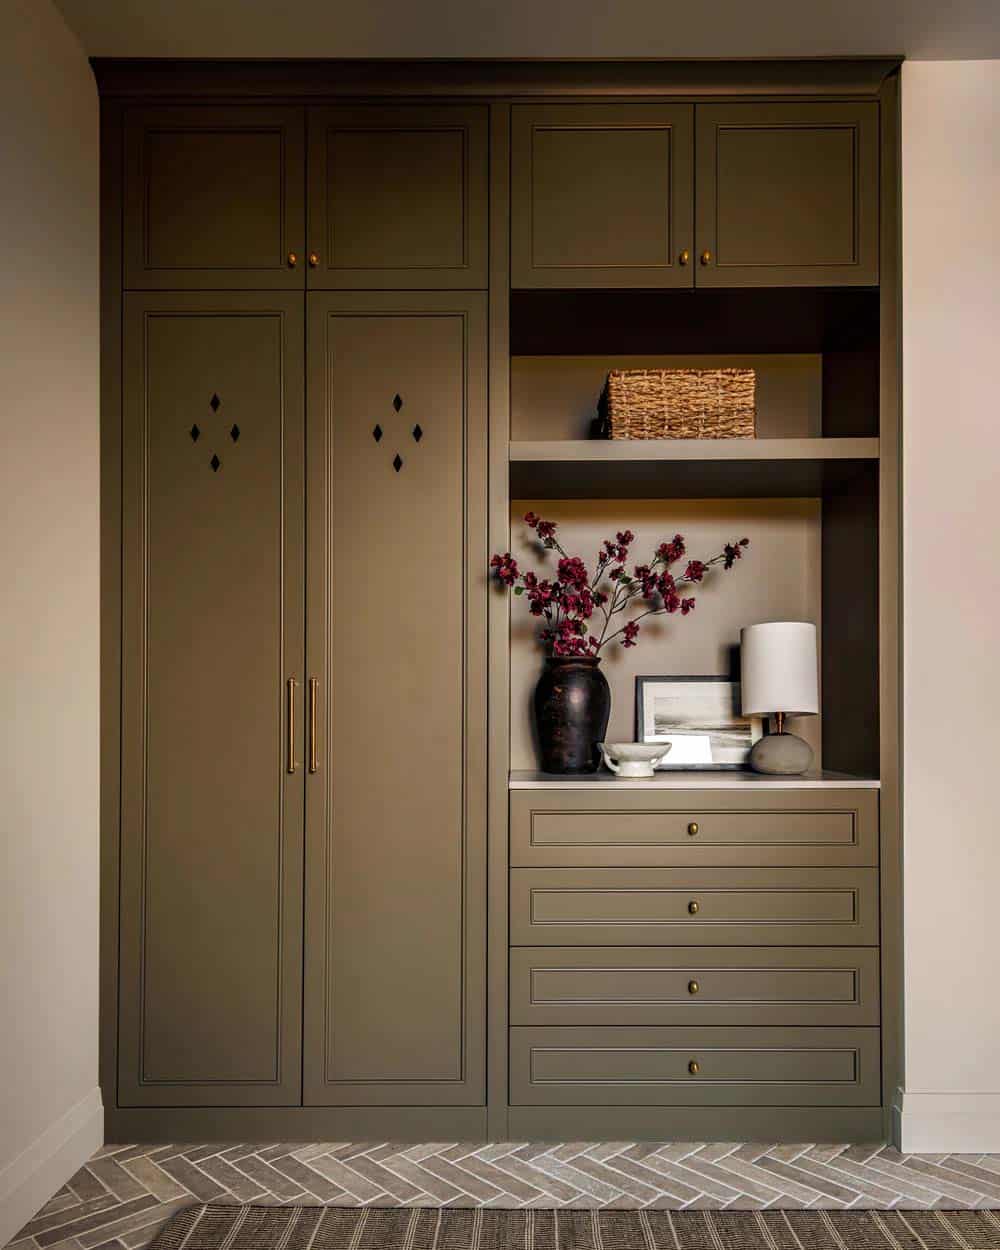 contemporary mudroom with a built-in storage closet painted in olive green and brick herringbone flooring